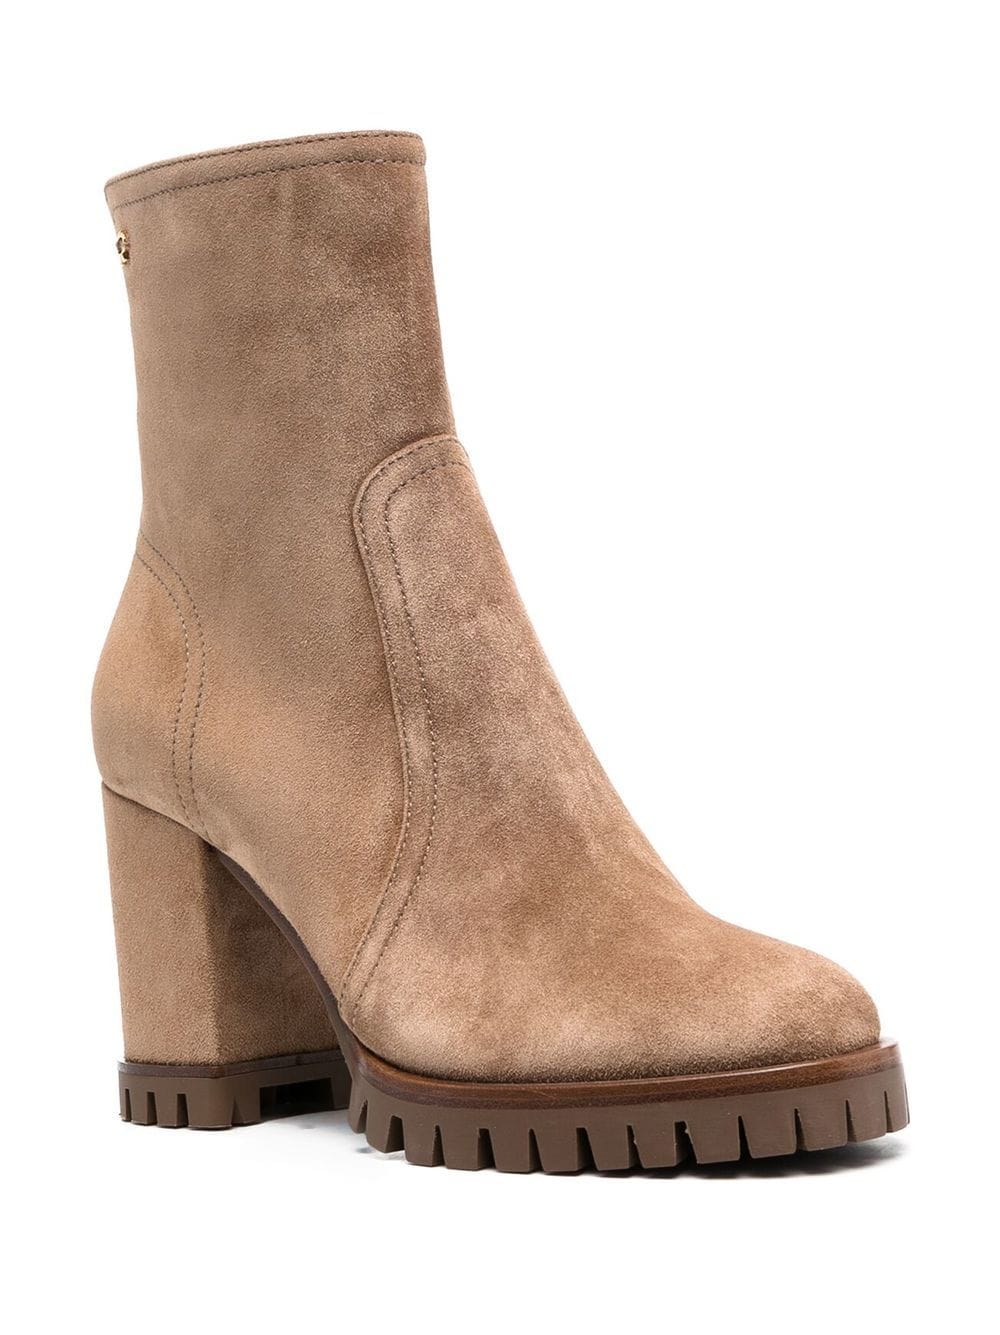 Image 2 of Gianvito Rossi Timber 70mm suede boots